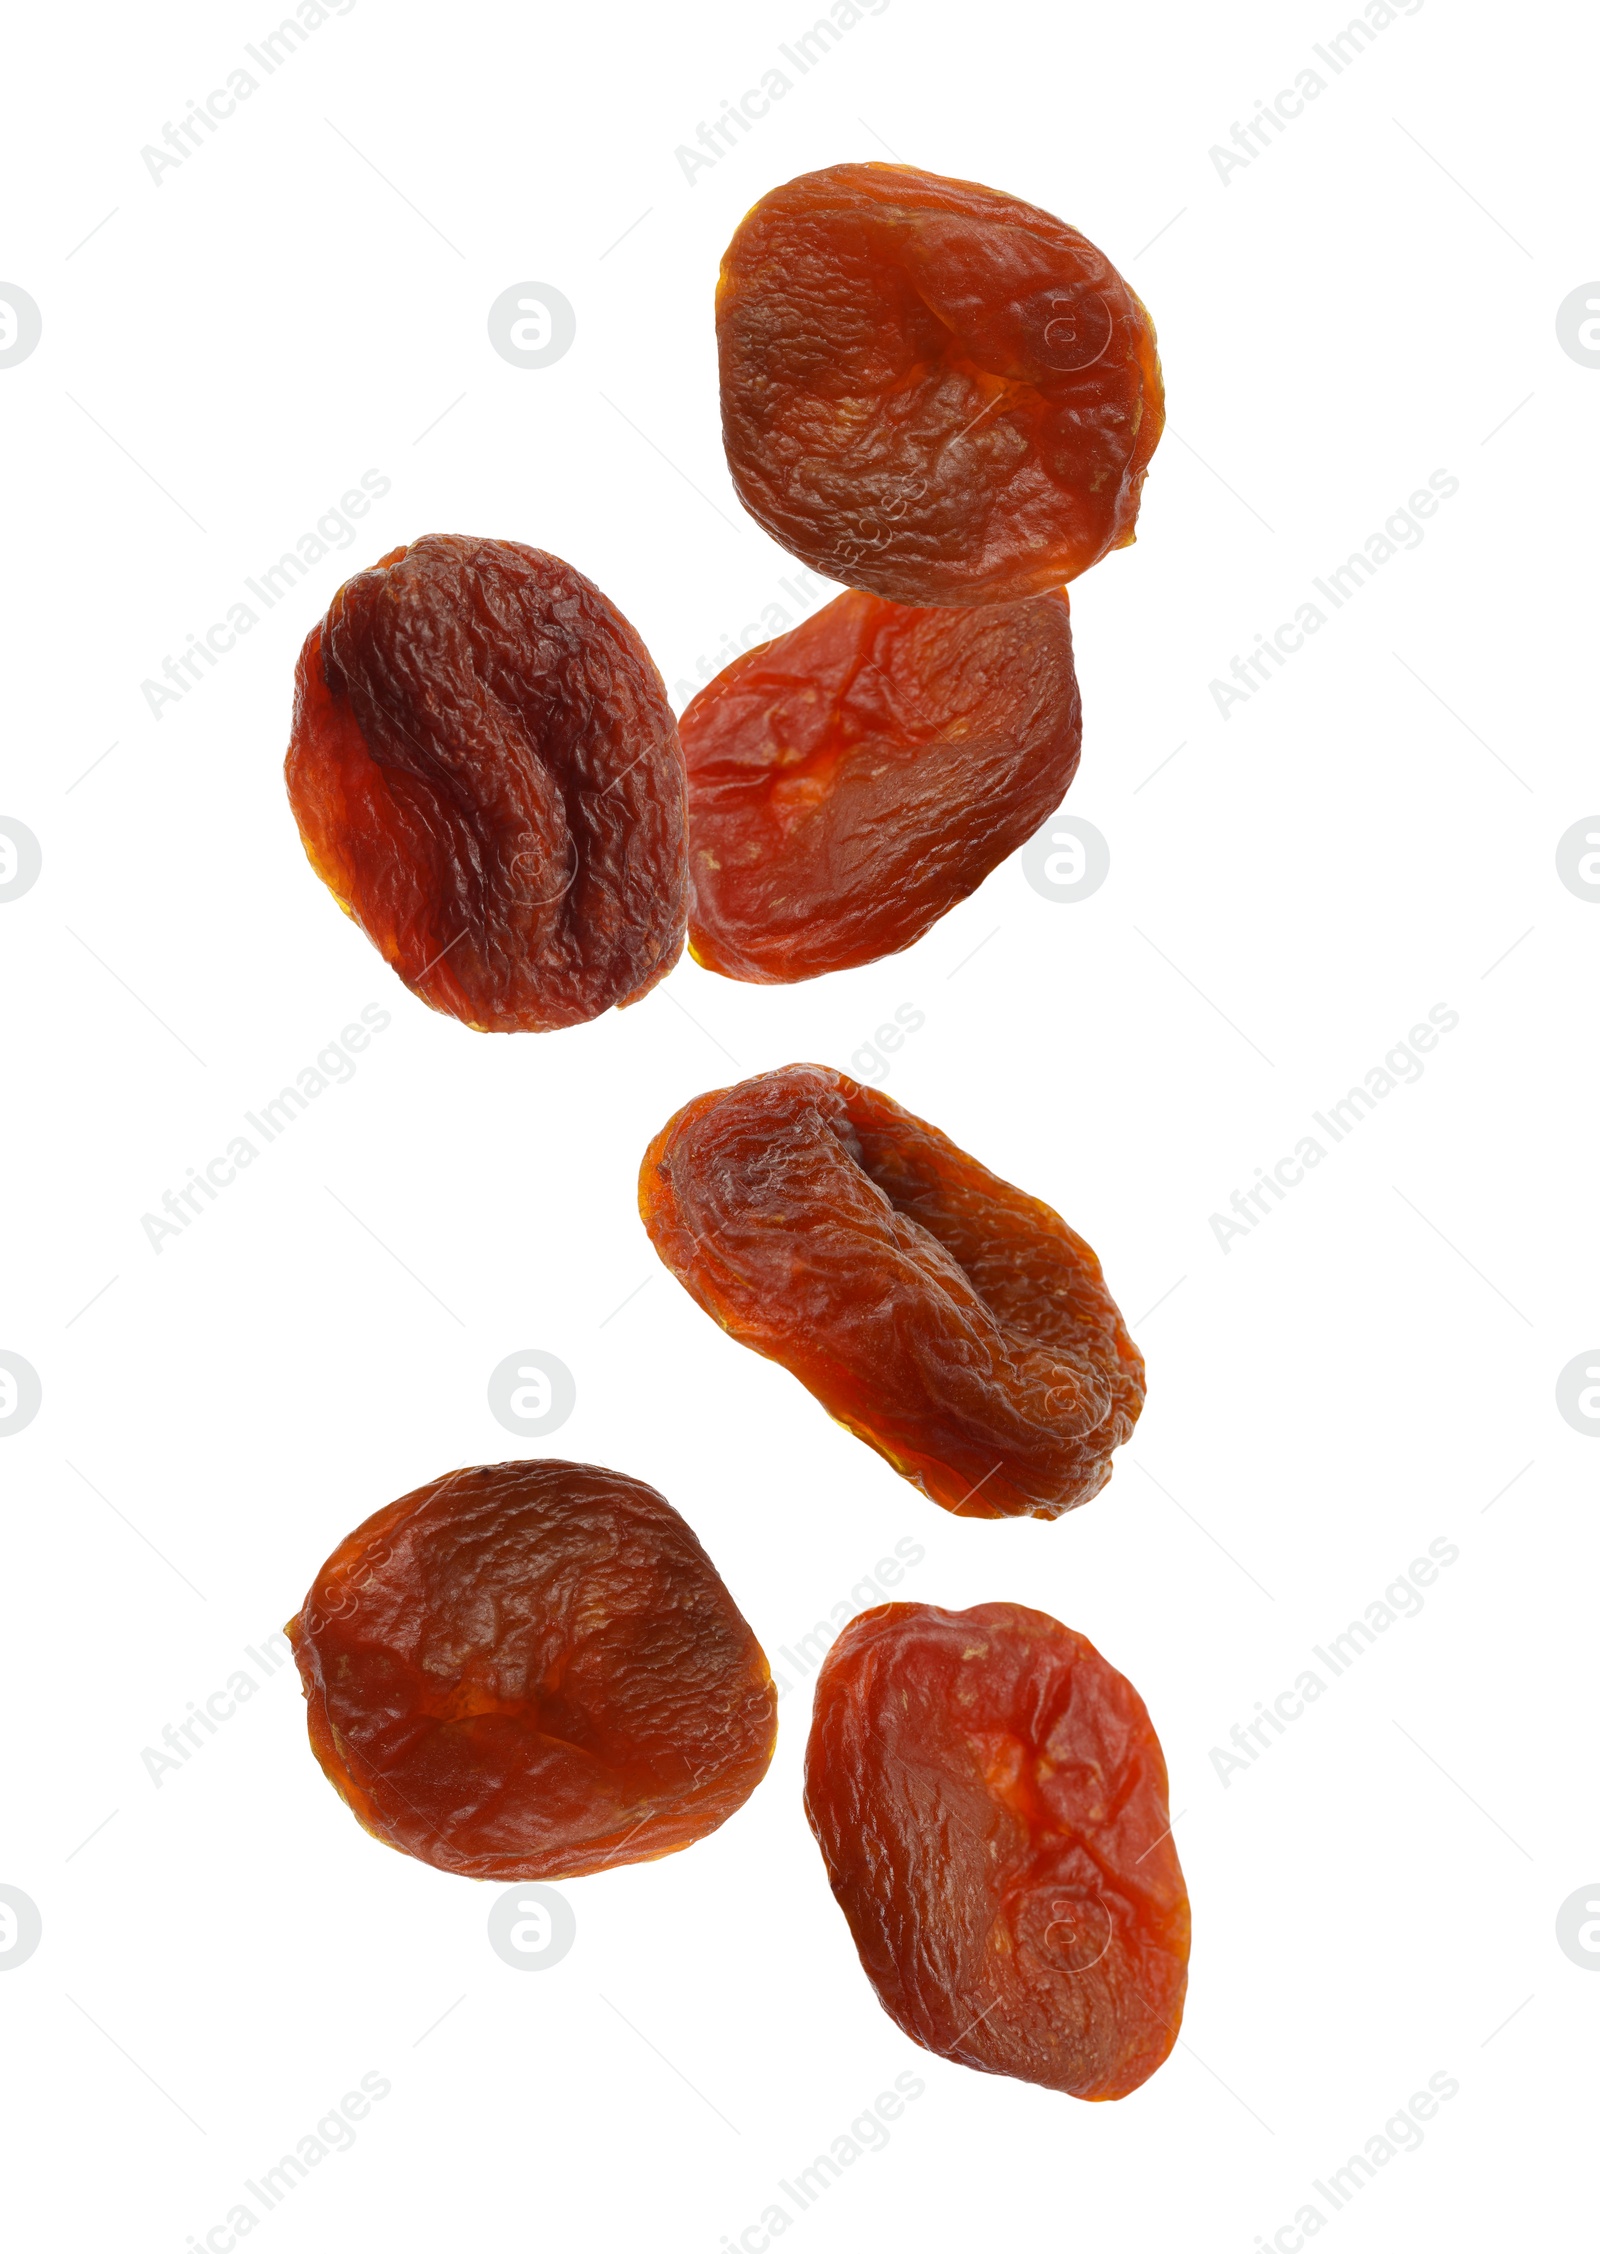 Image of Many tasty dried apricots on white background